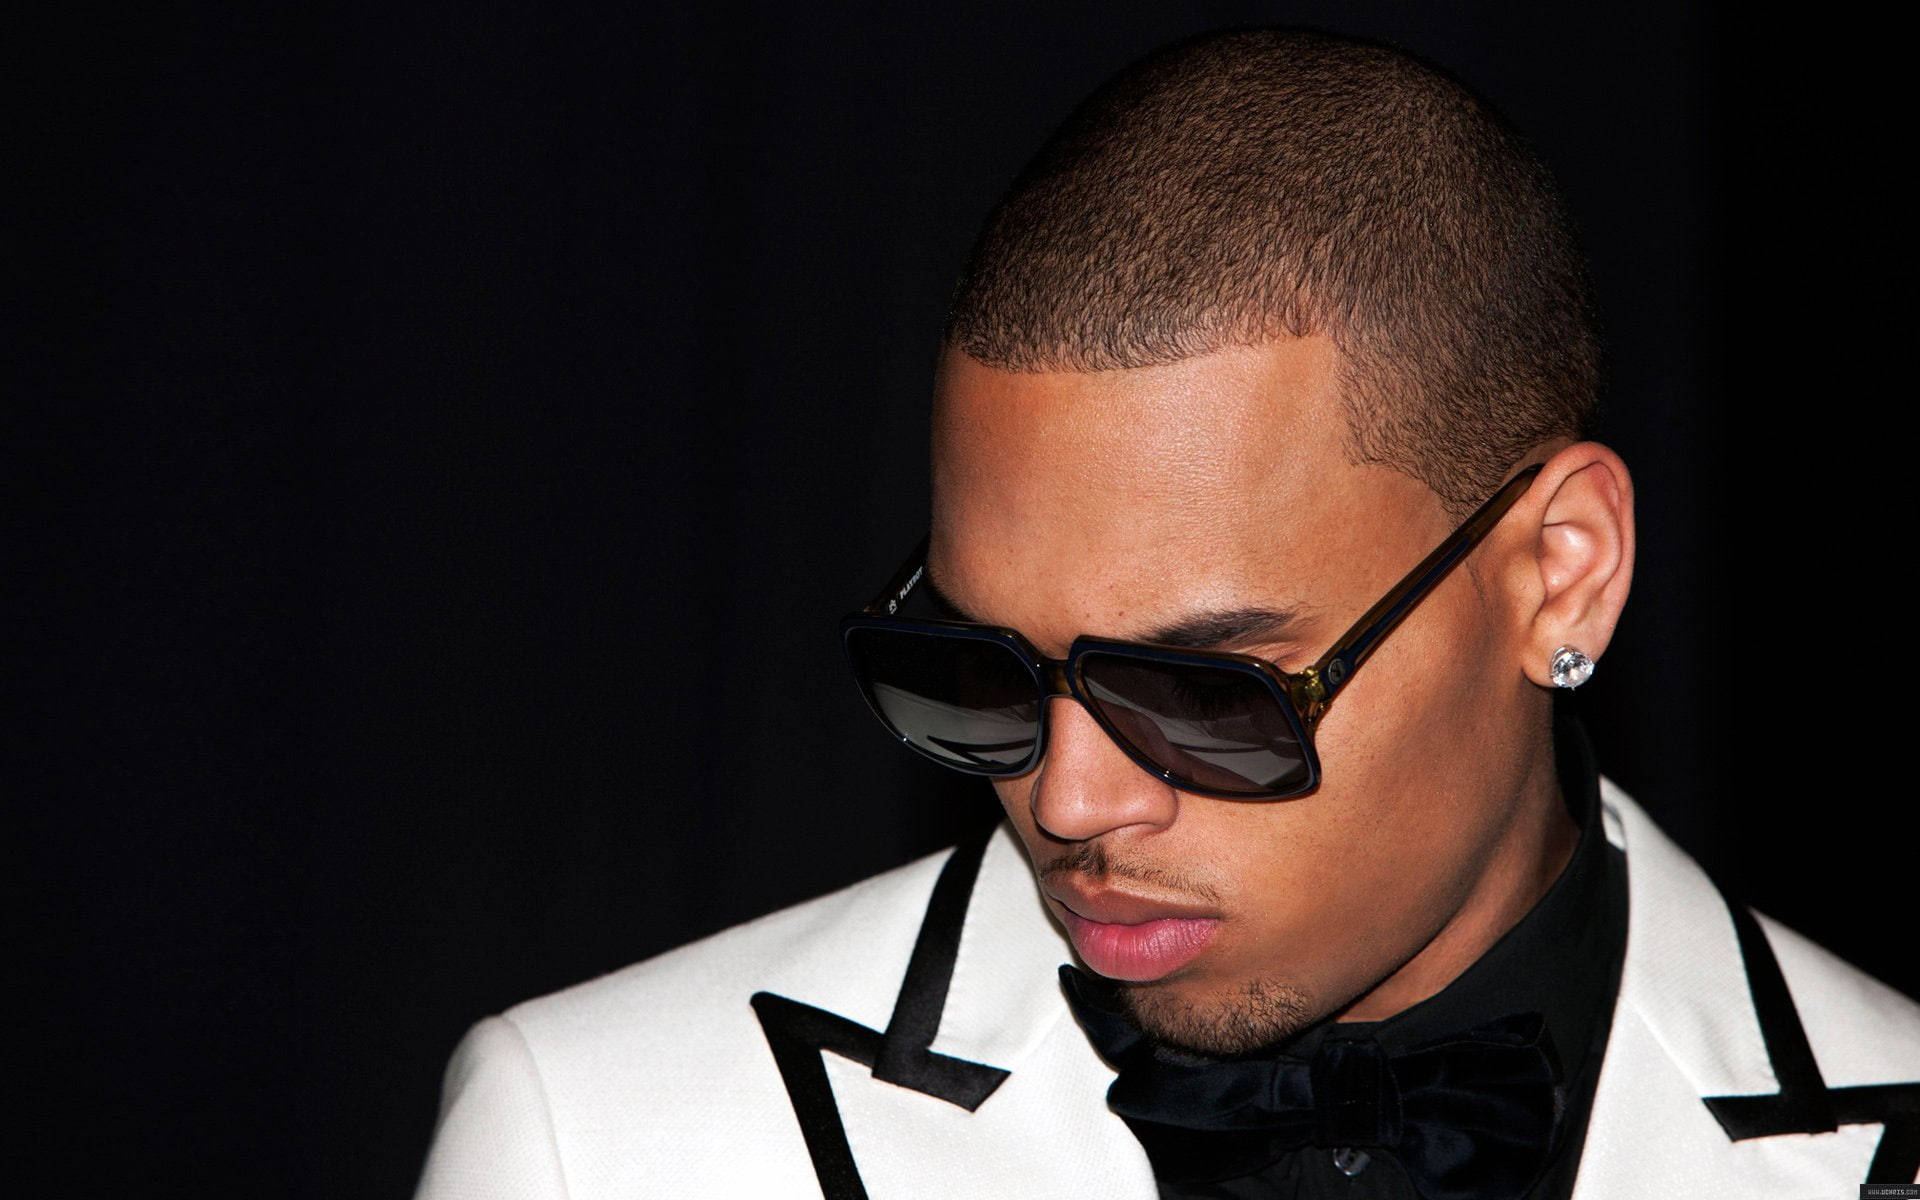 Chris Brown With Sunglasses Background